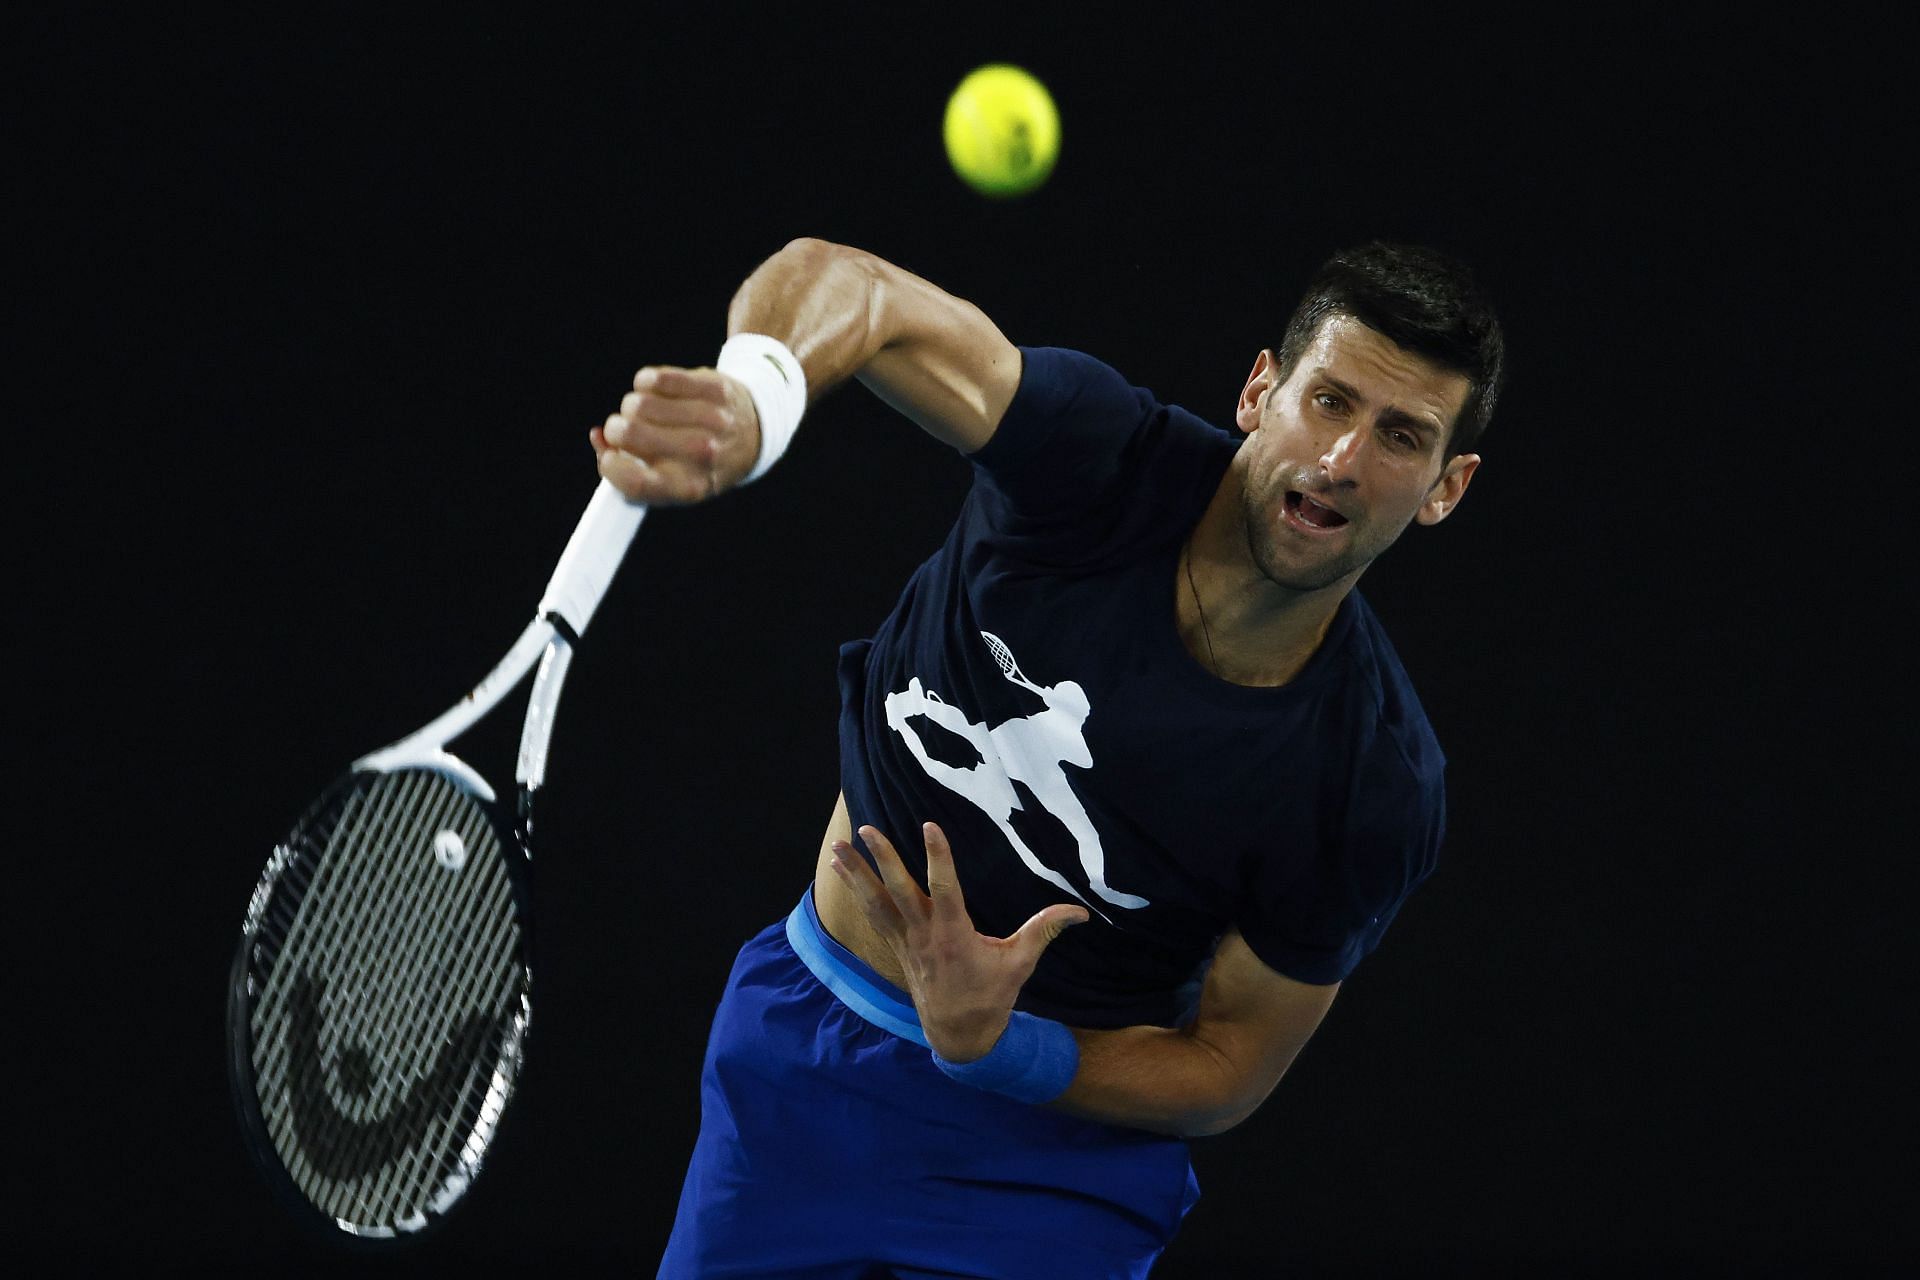 There is a chance Djokovic could be deported from Australia